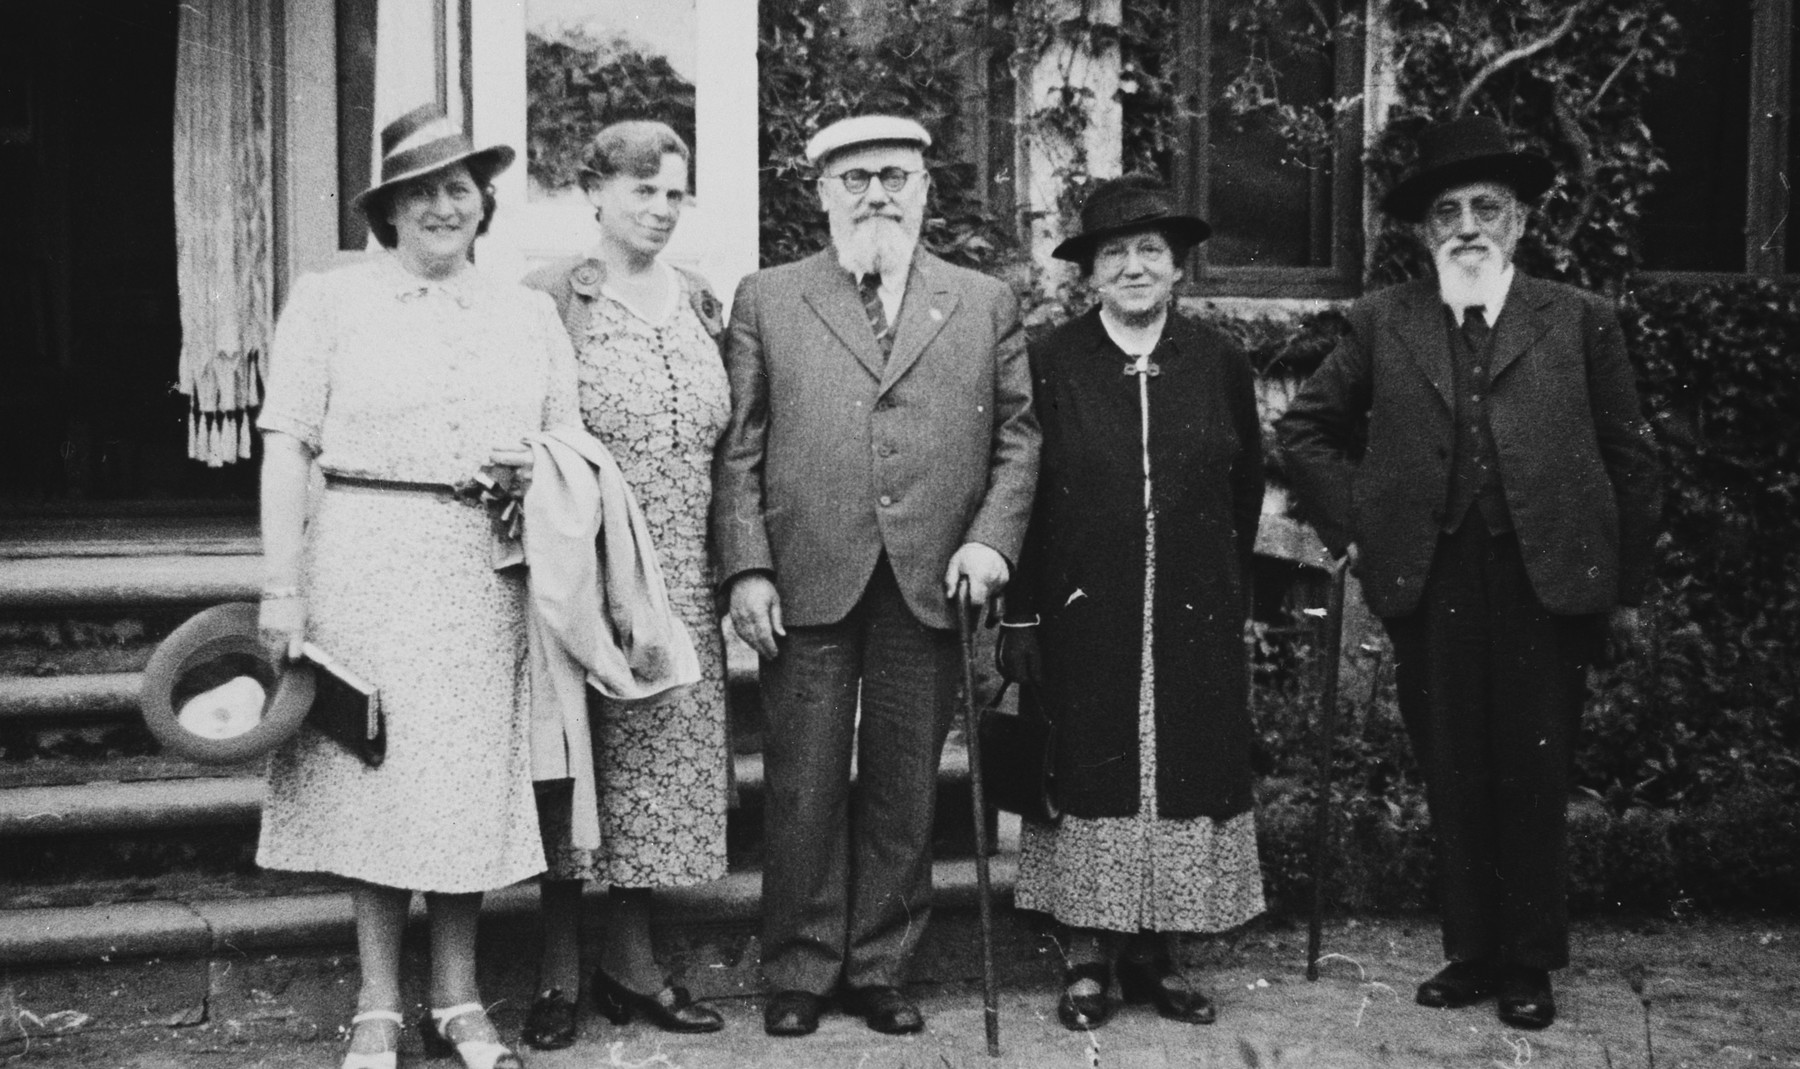 Five Danish Jews pose outside a home in Copenhagen.

Among those pictured are the Hartvigs, the grandparents of Hetty Fisch.